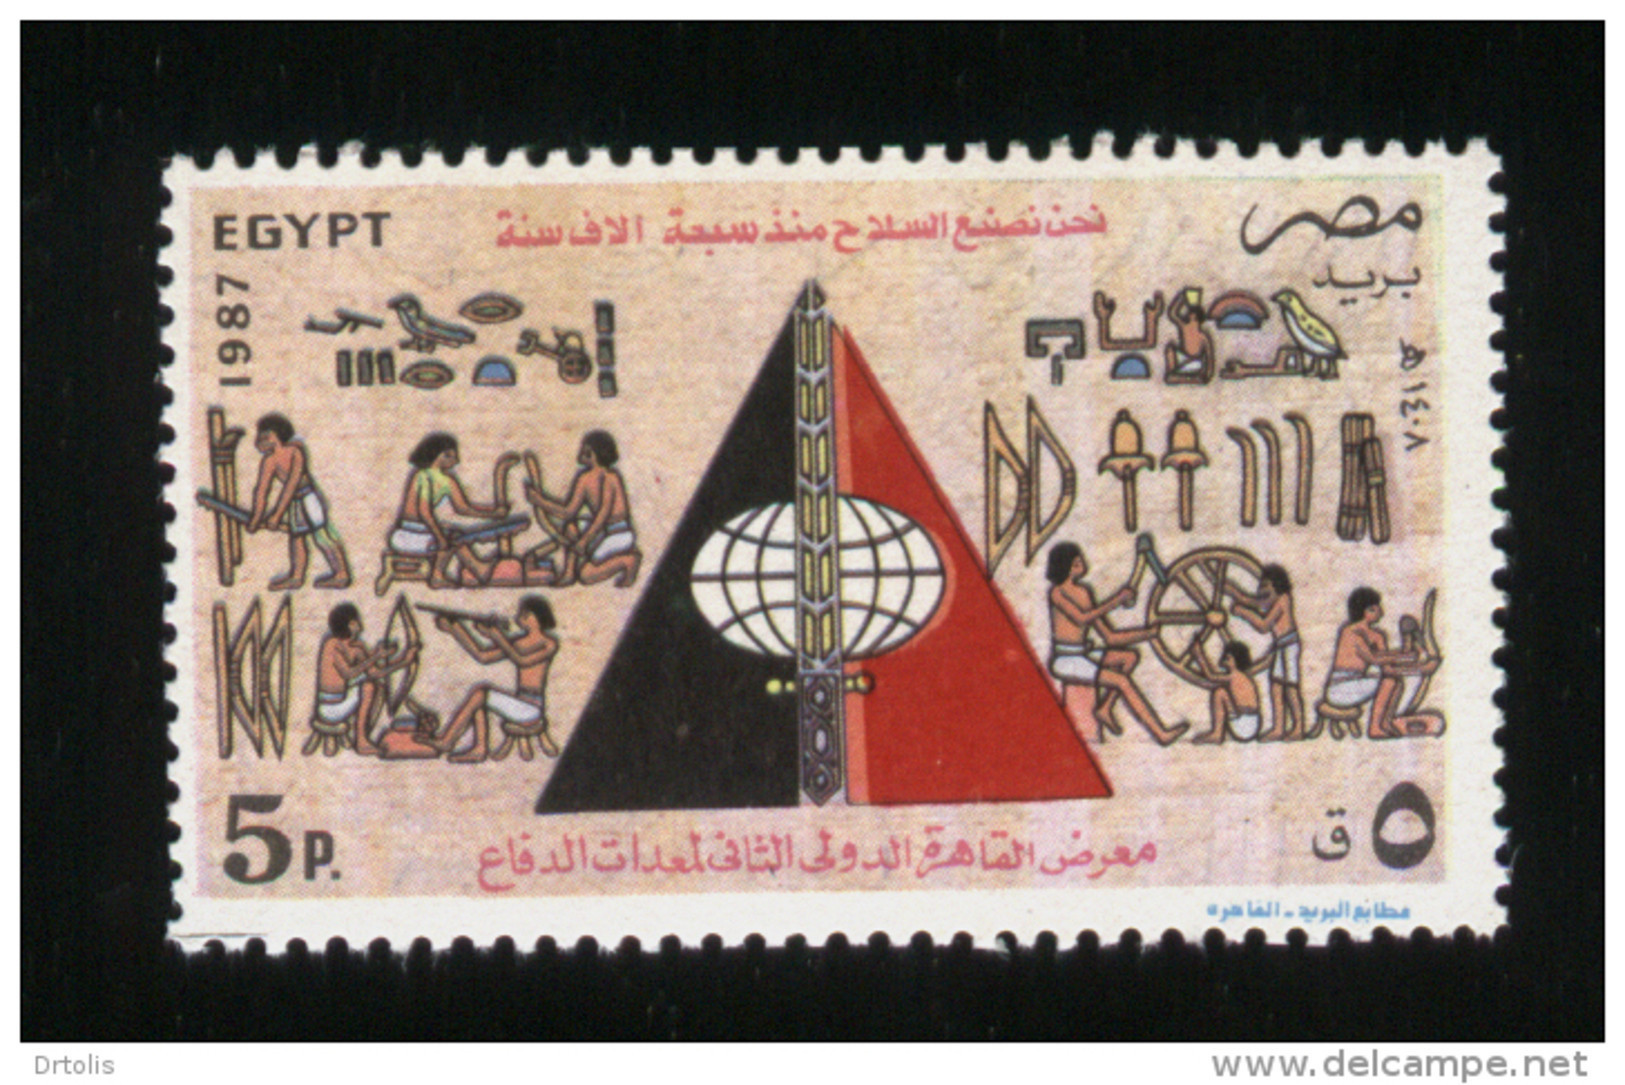 EGYPT / 1987 / INTL. DEFENCE EQUIPMENT EXHIBITION / ANCIENT EGYPTIANS MAKING WEAPONS / MNH / VF - Nuovi